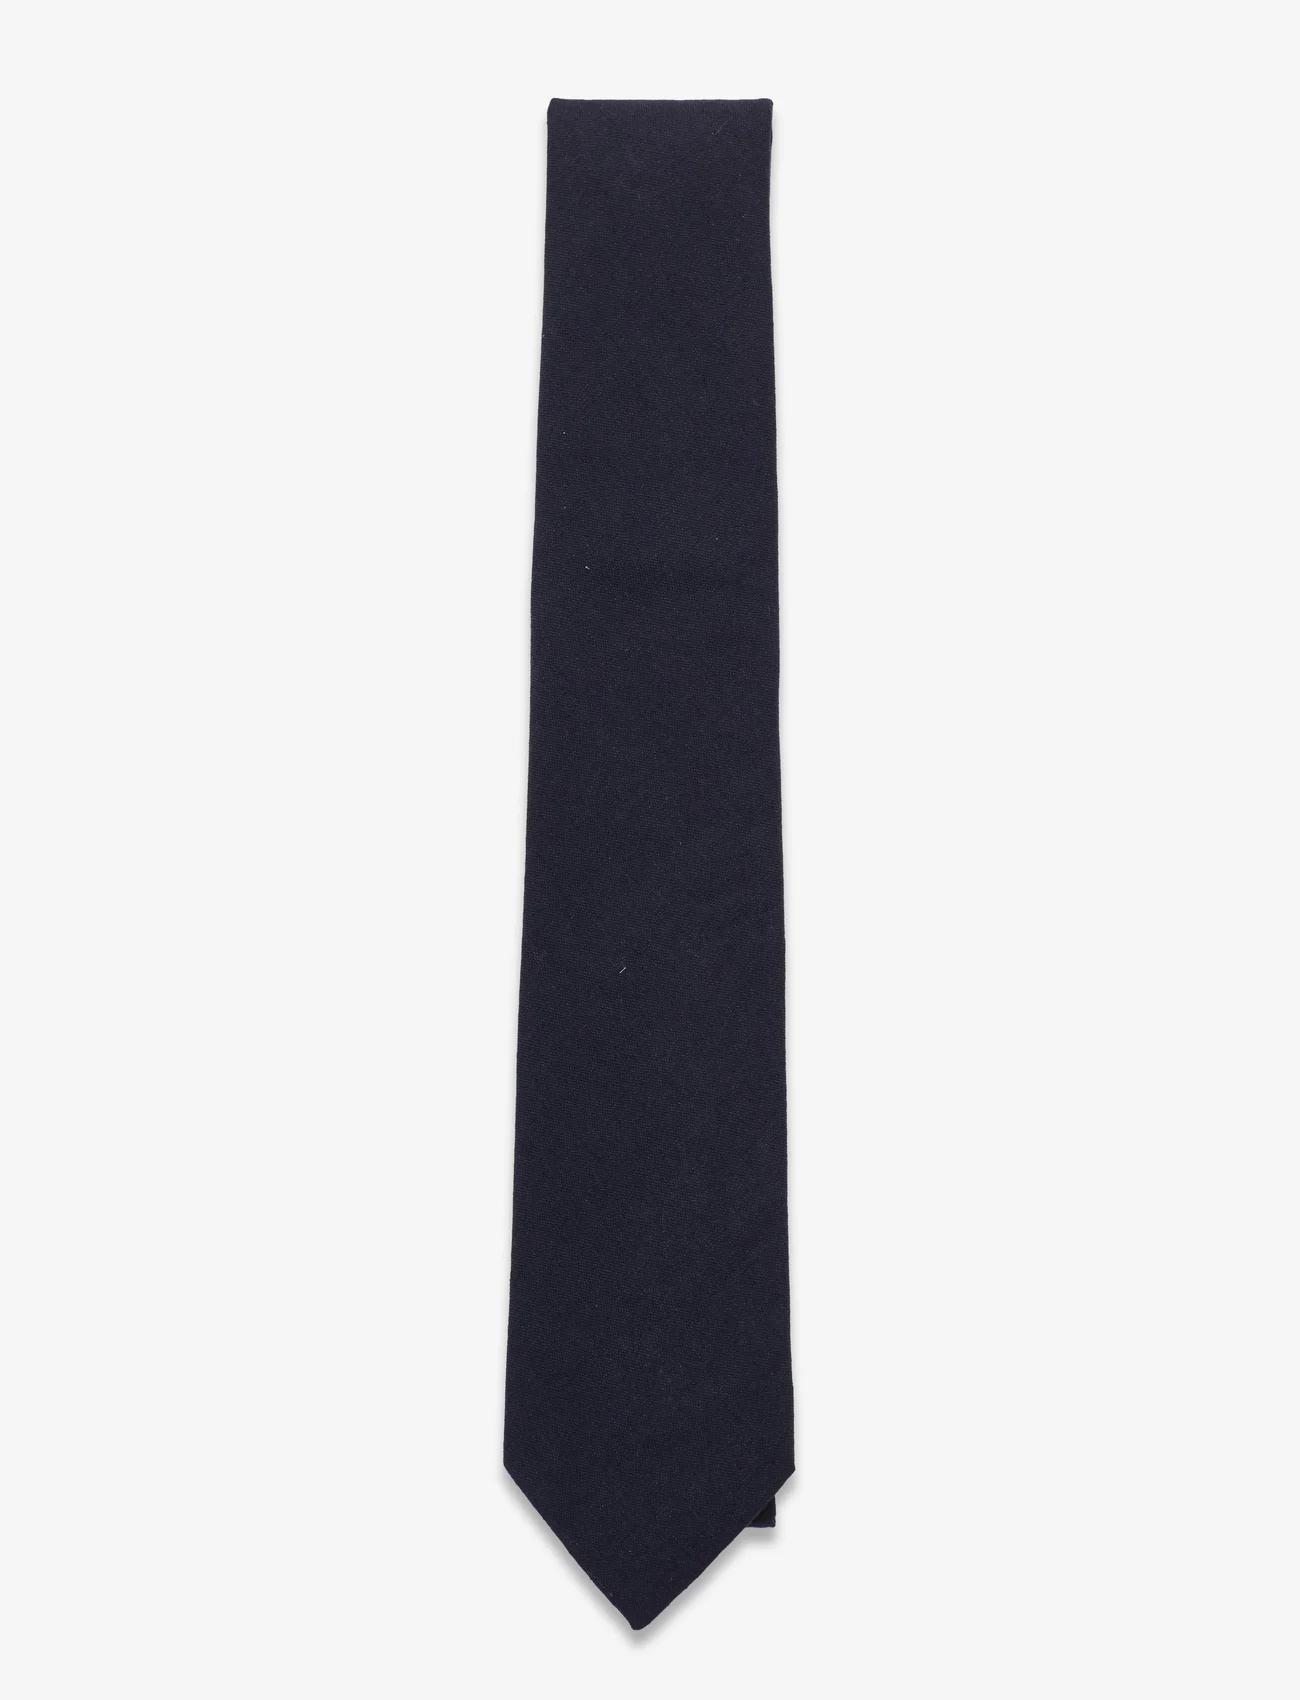 AN IVY - Solid Navy Cotton Tie - lipsud - navy - 0